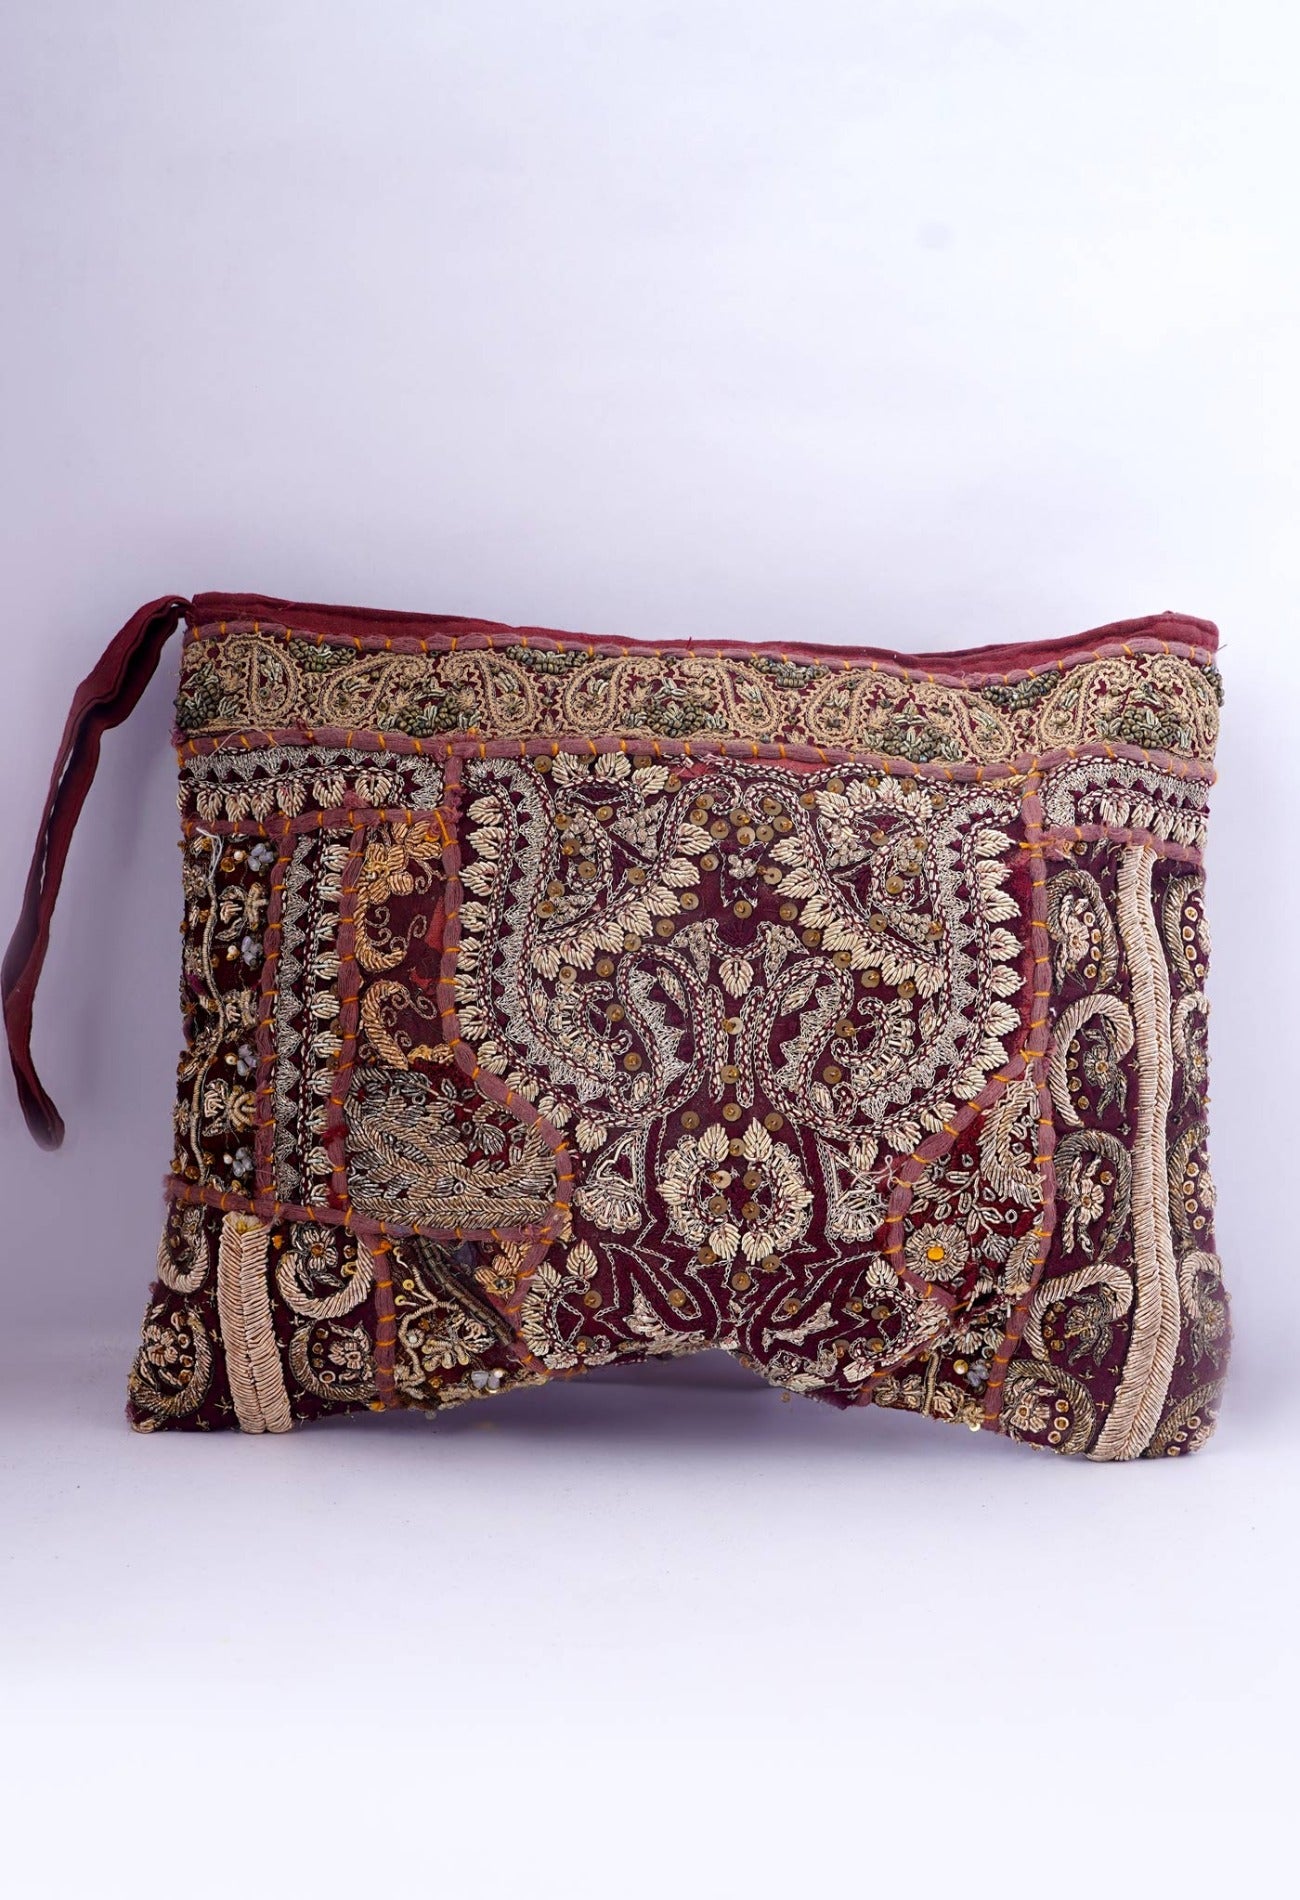 Online Shopping for Maroon Indian Handicraft Embroidered Hand Bag with Weaving from Rajasthan at Unnatisilks.com India_x000D_
Online Shopping for Maroon Indian Handicraft Embroidered Hand Bag with Weaving from Rajasthan at Unnatisilks.com India_x000D_
Online Shopping for Maroon Indian Handicraft Embroidered Hand Bag with Weaving from Rajasthan at Unnatisilks.com India_x000D_
